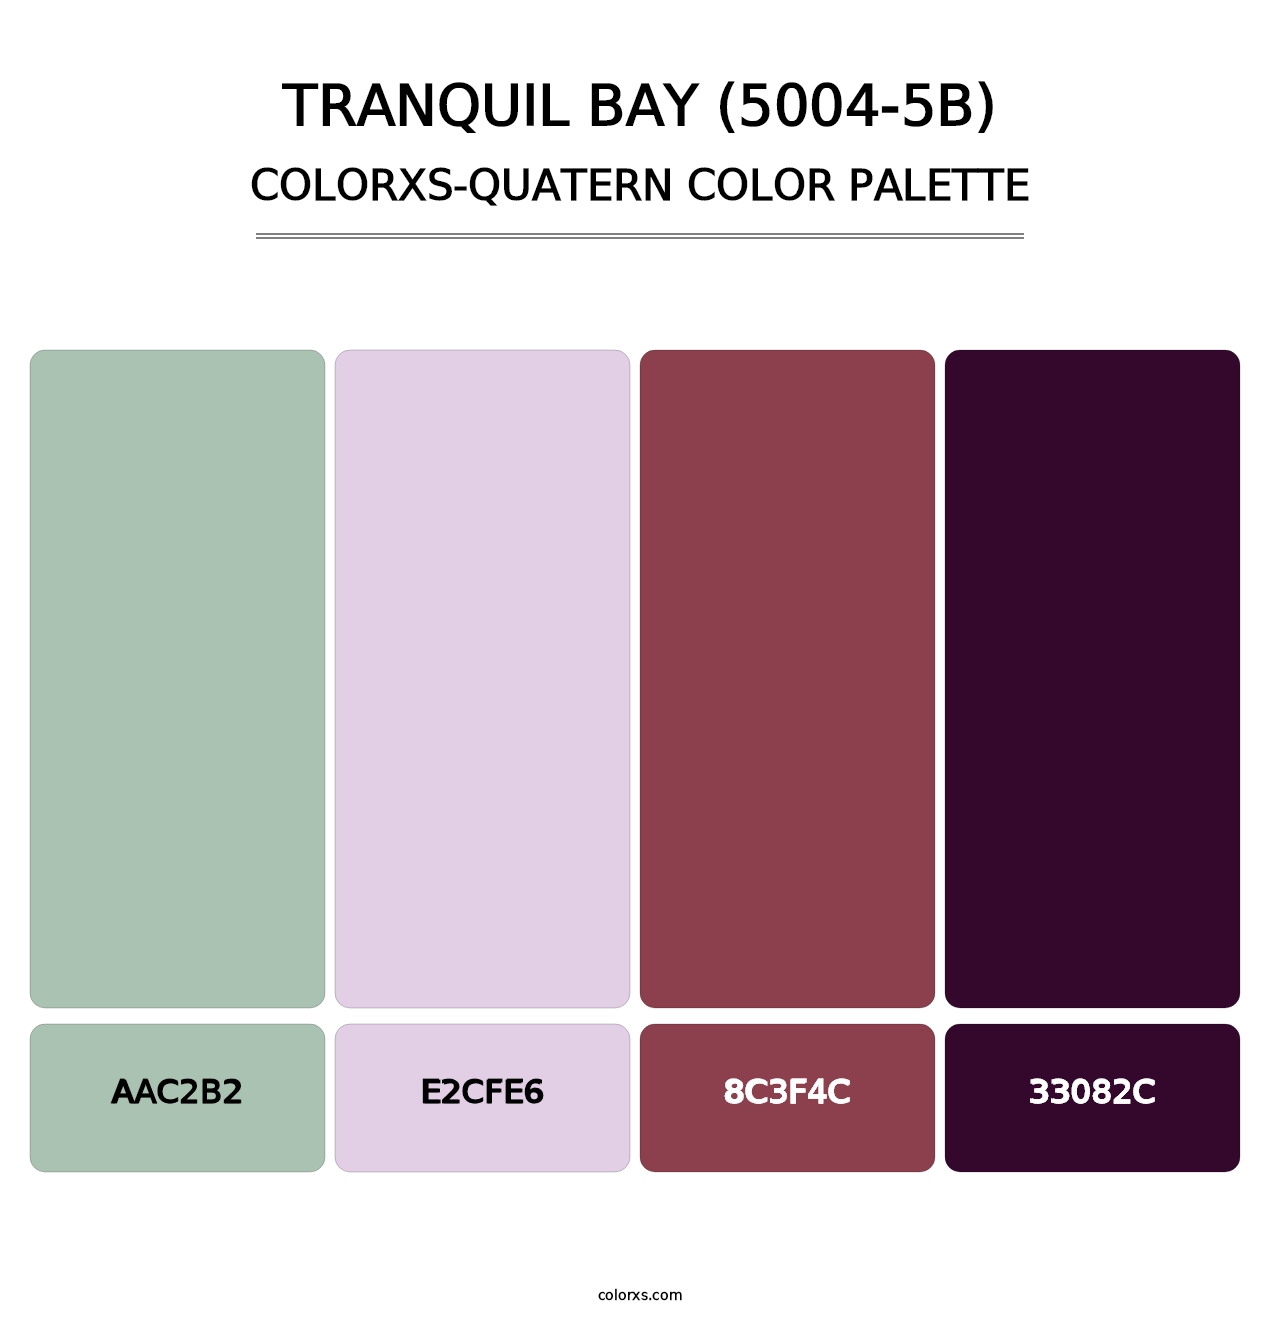 Tranquil Bay (5004-5B) - Colorxs Quatern Palette